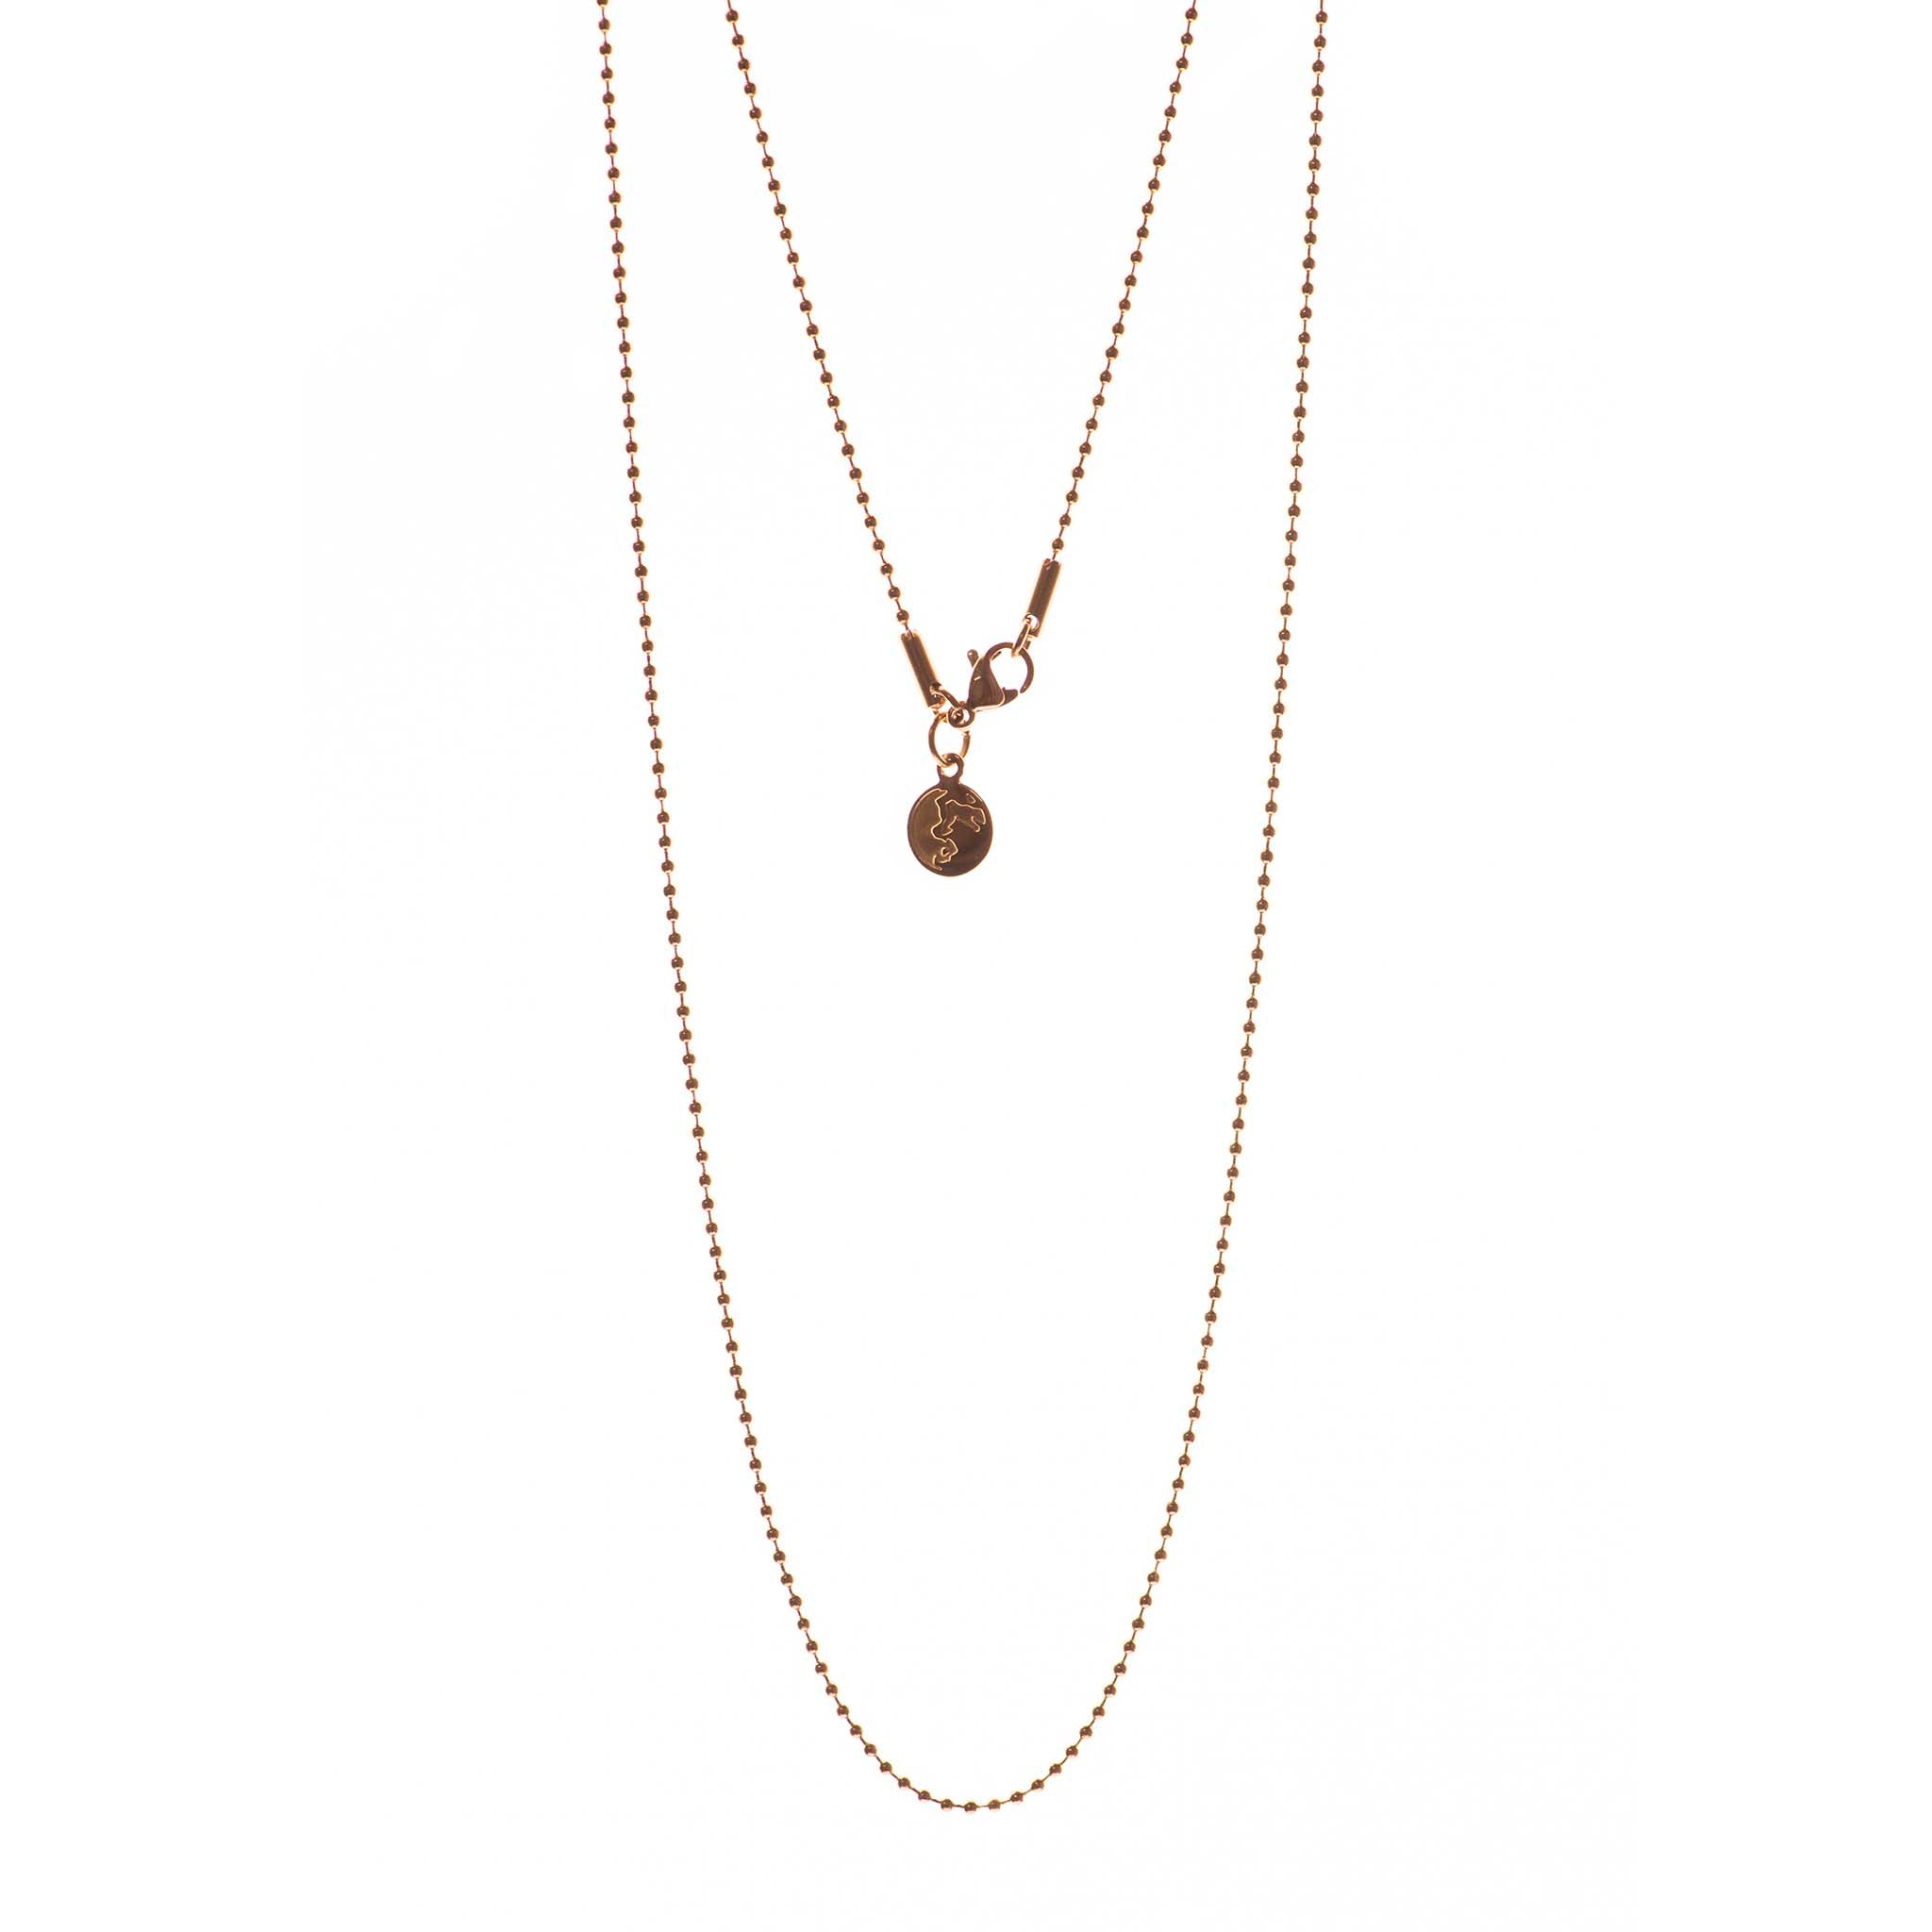 Rose gold Beaded 28 inch chain